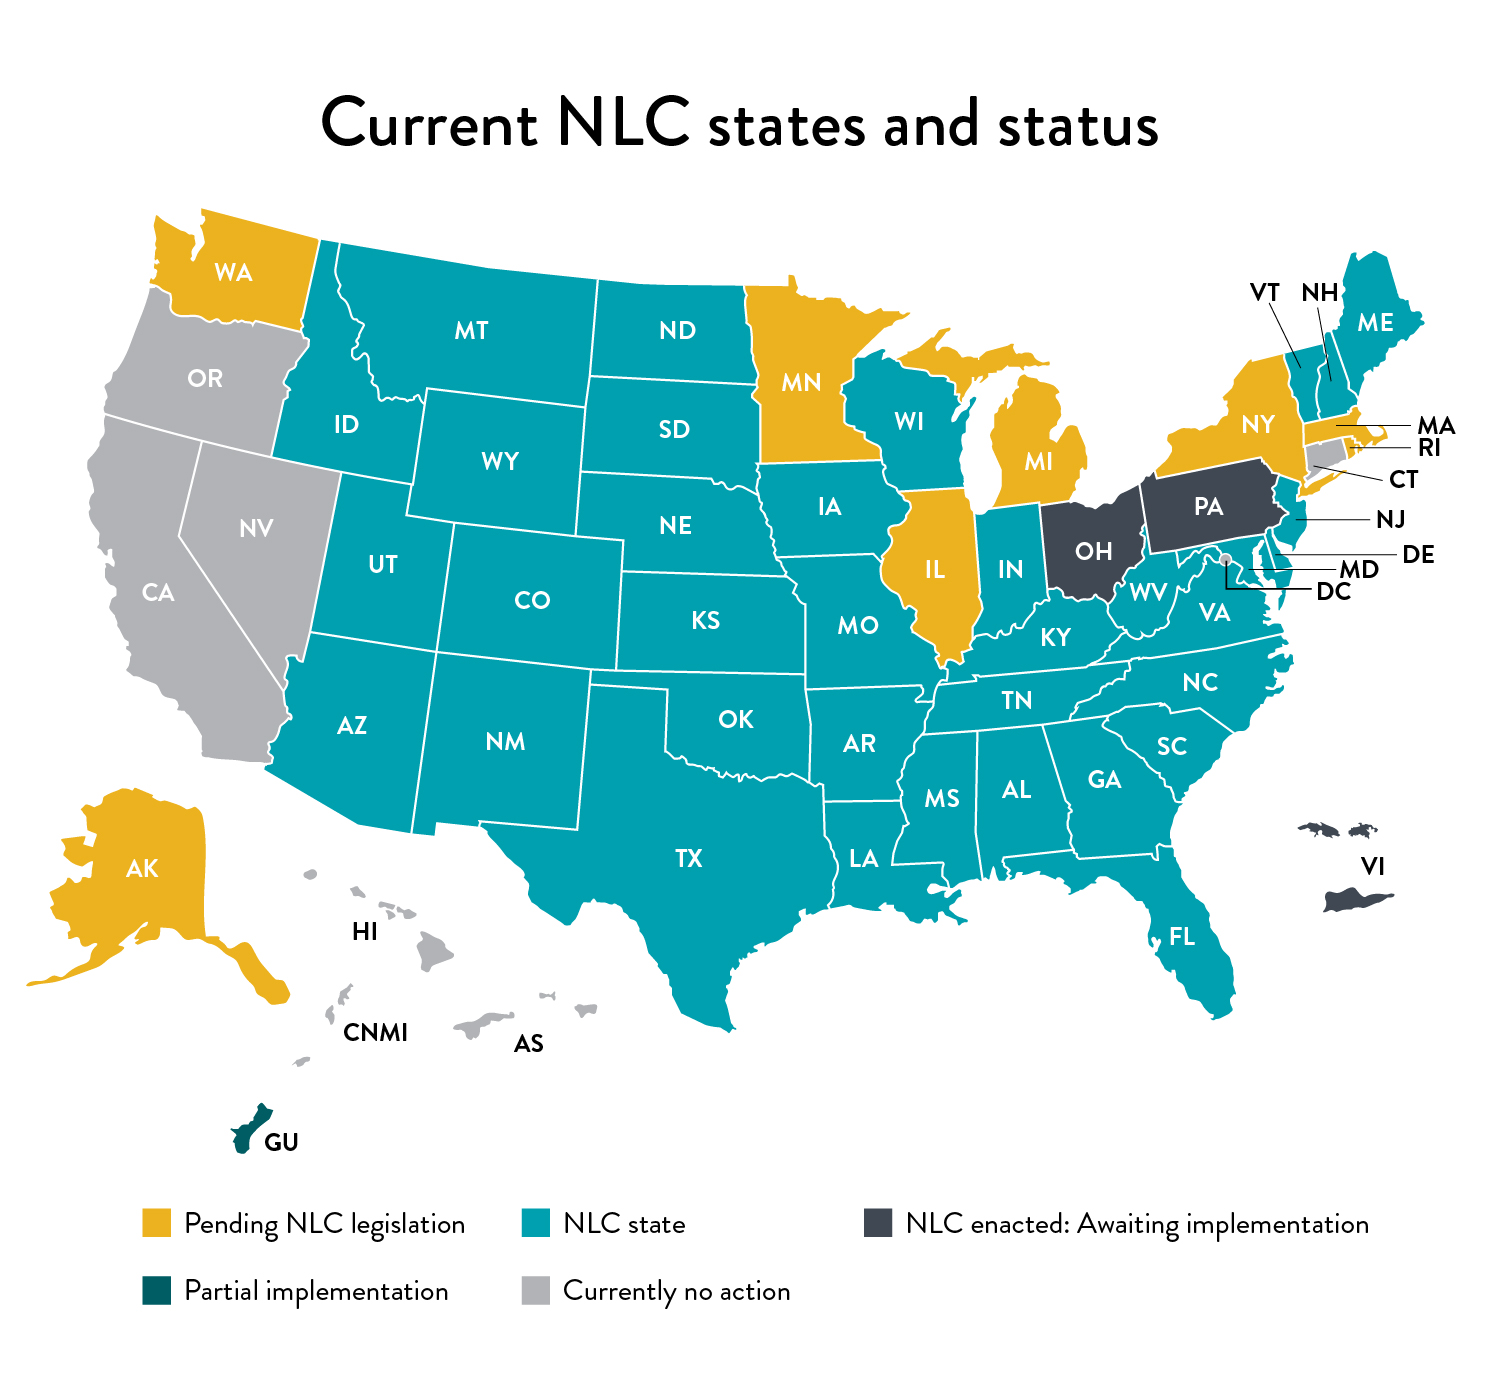 NLC states map as of 10/13/2022